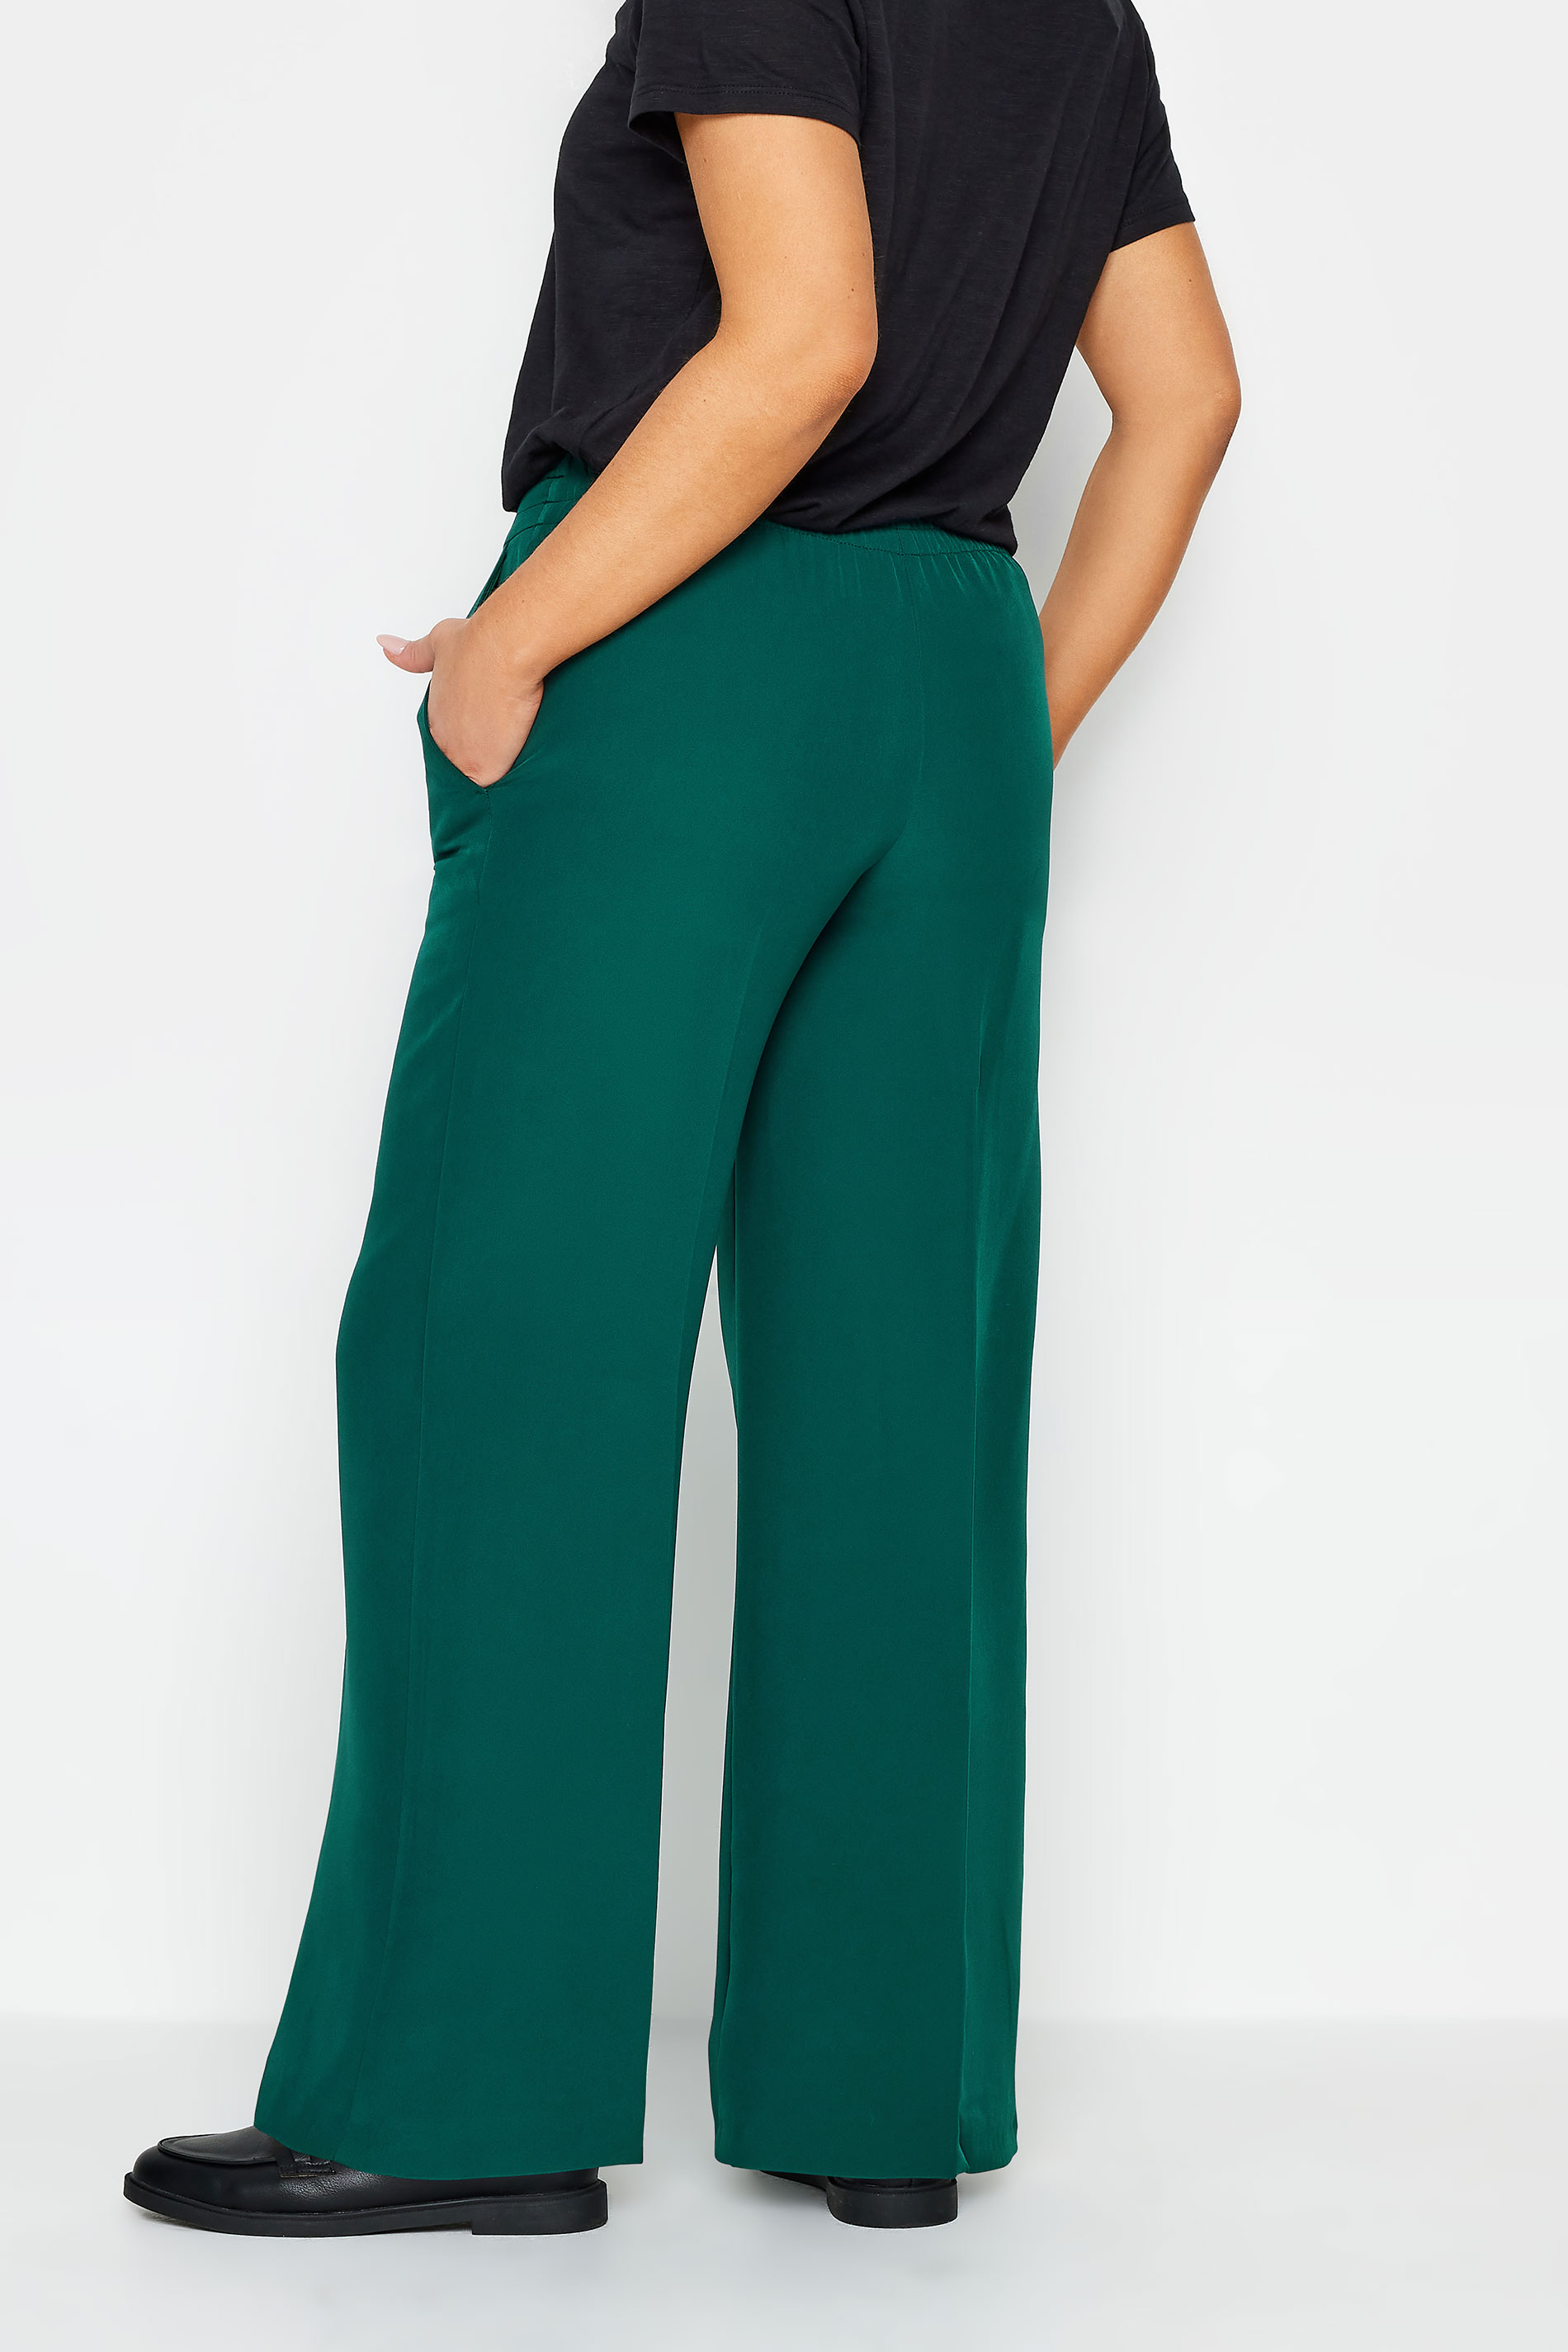 M&Co Teal Green Crepe Wide Leg Tousers